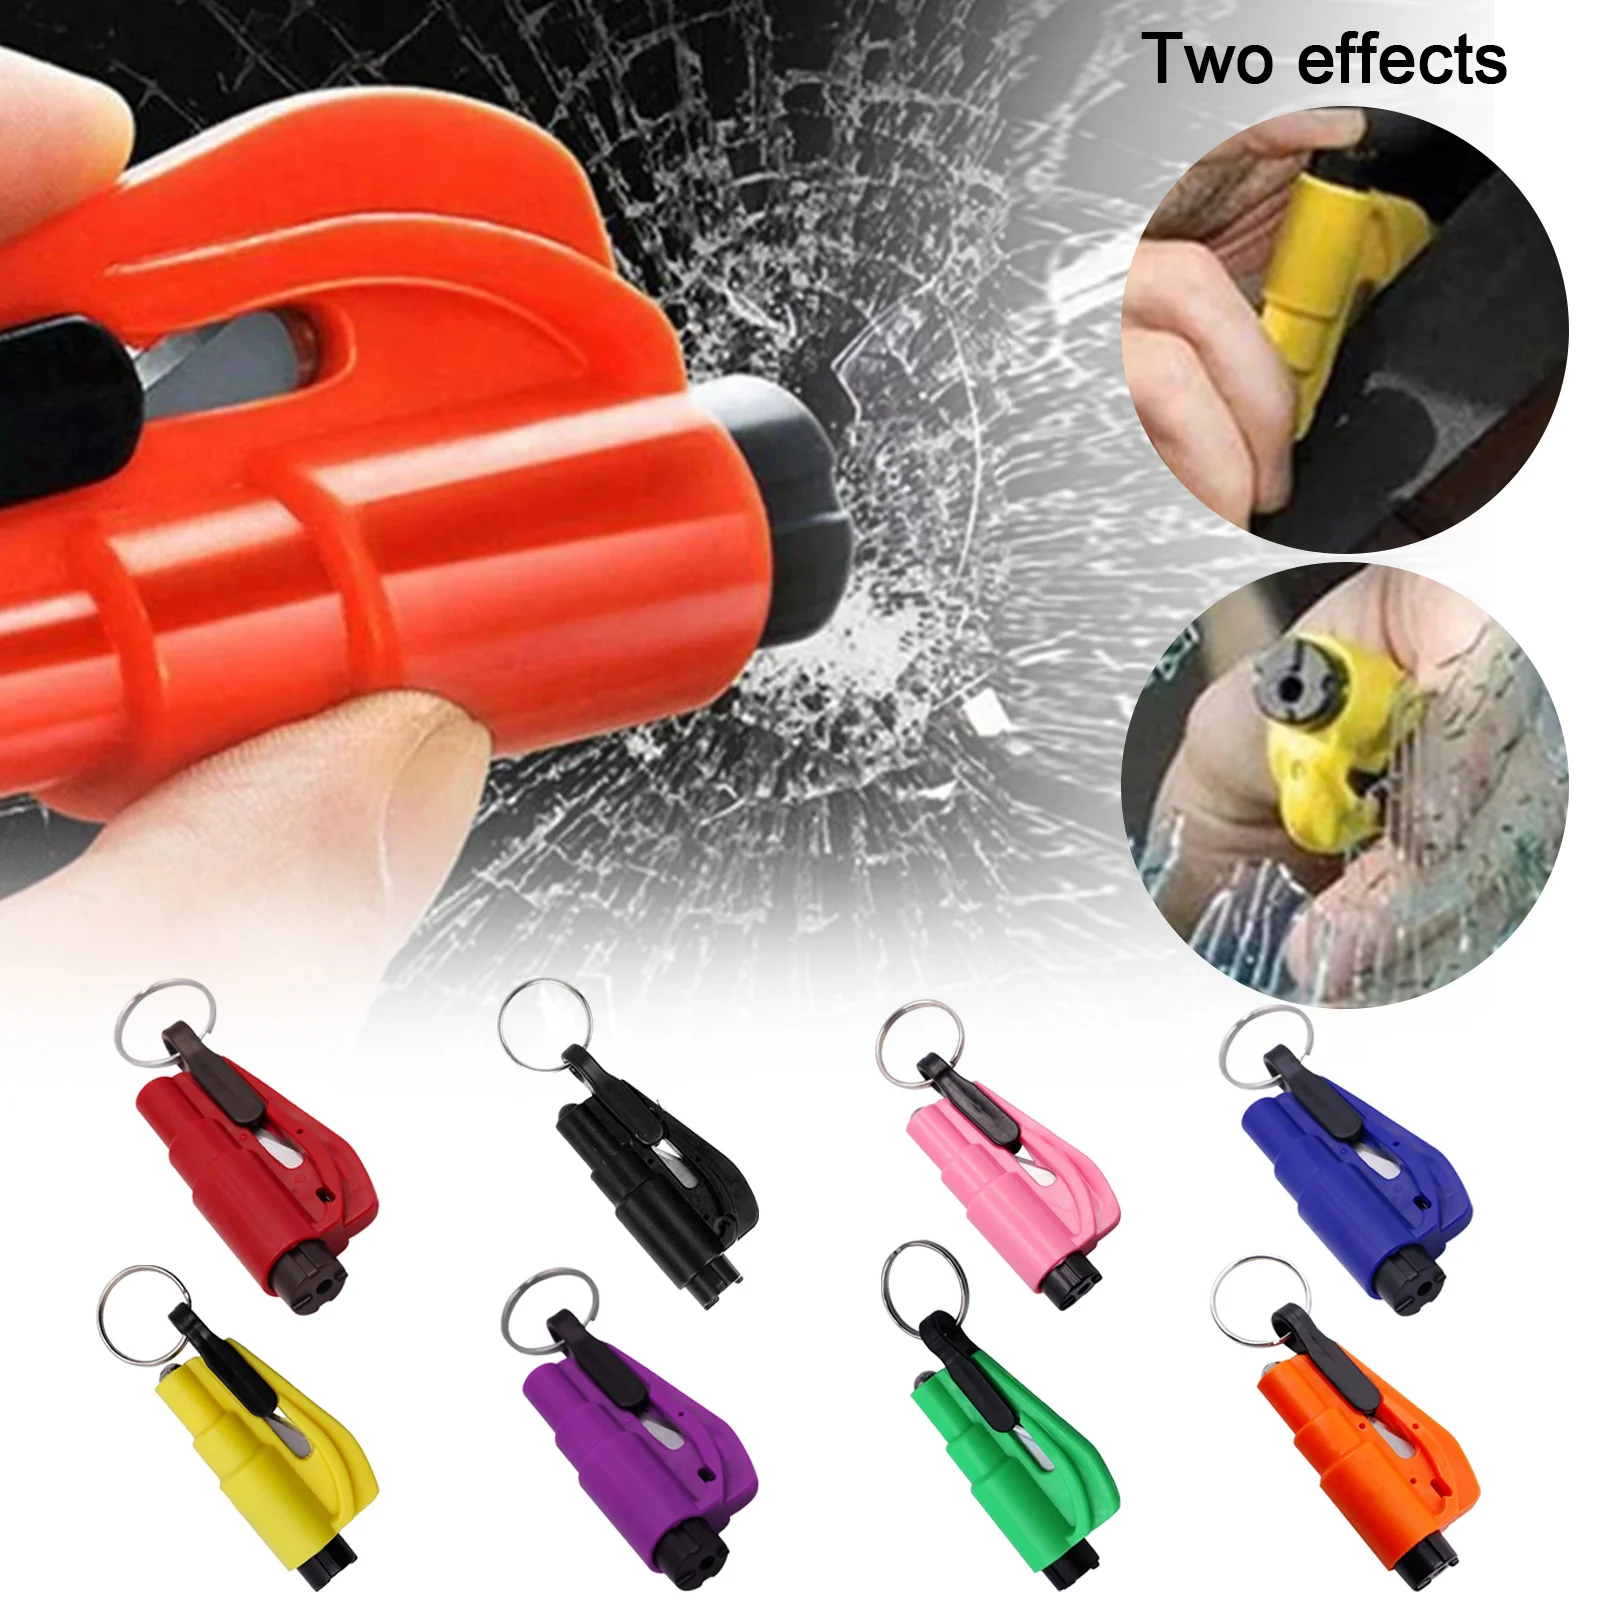 Car Window Breaker With Car Seat Belt Cutter And Key Ring | Car Safety Hammer | Escape Tools